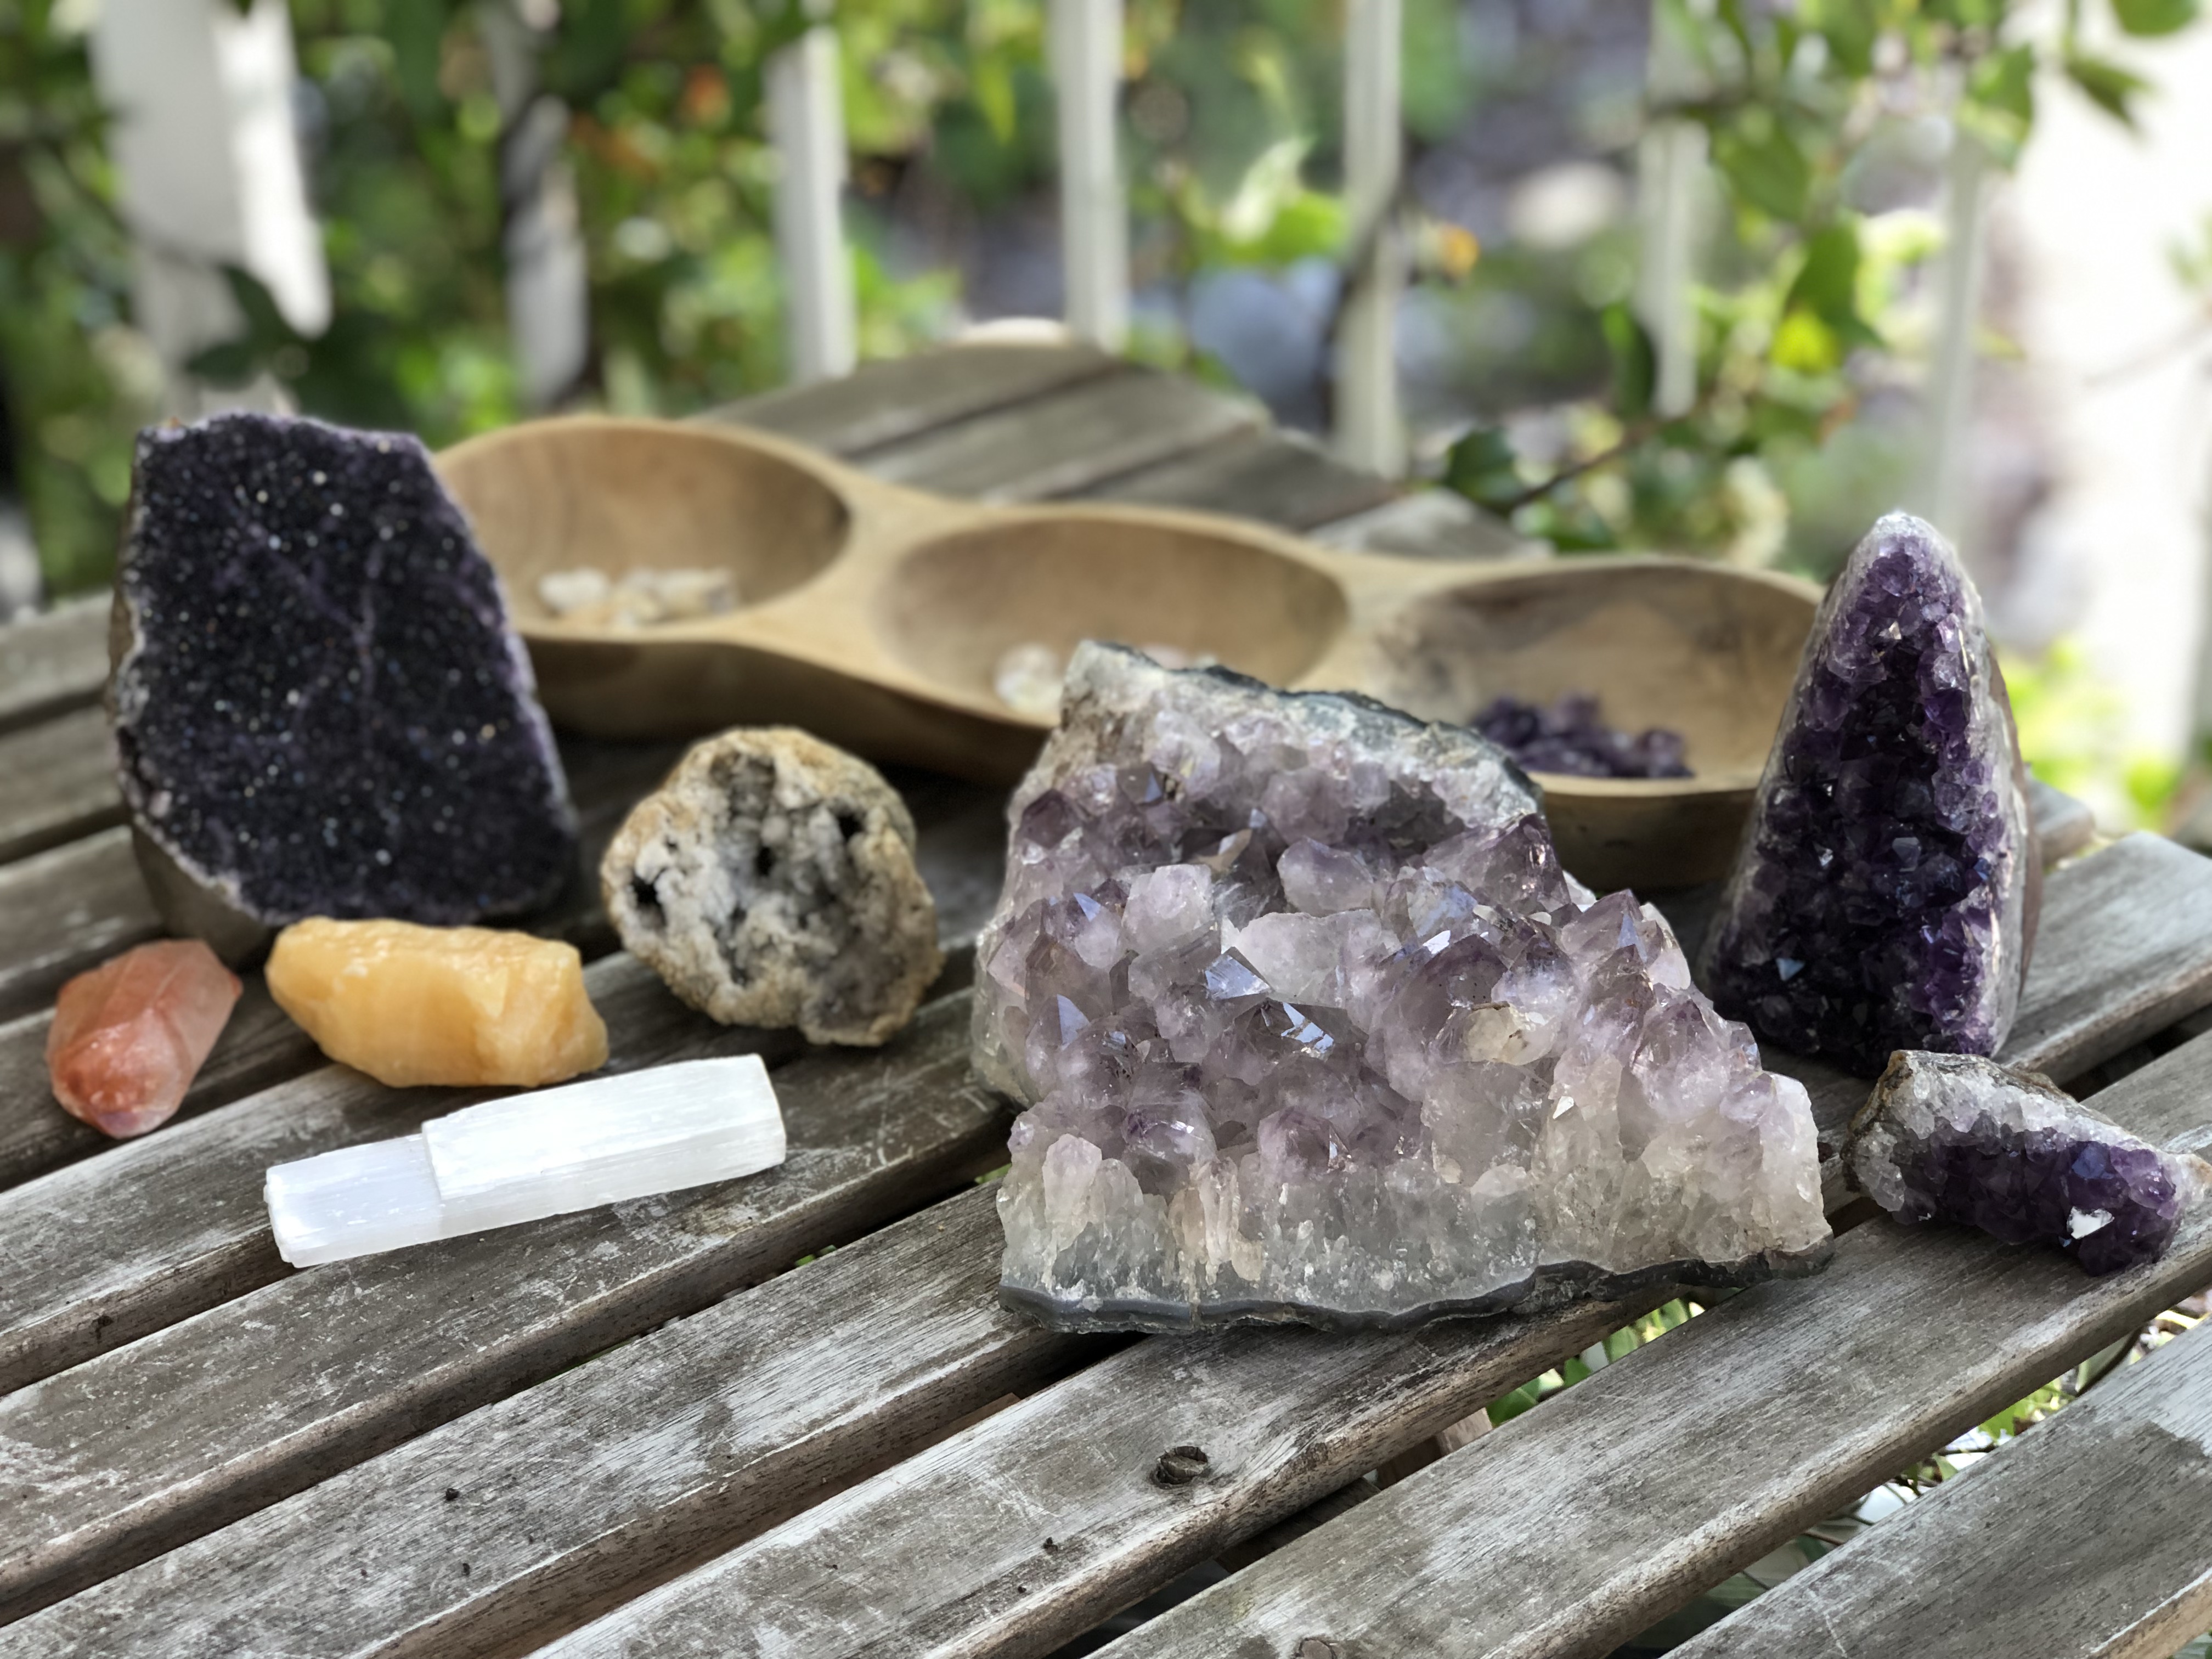 Each stone was hand-selected in the creation of special Mother's Day gemstone spa treatments at Botanica.